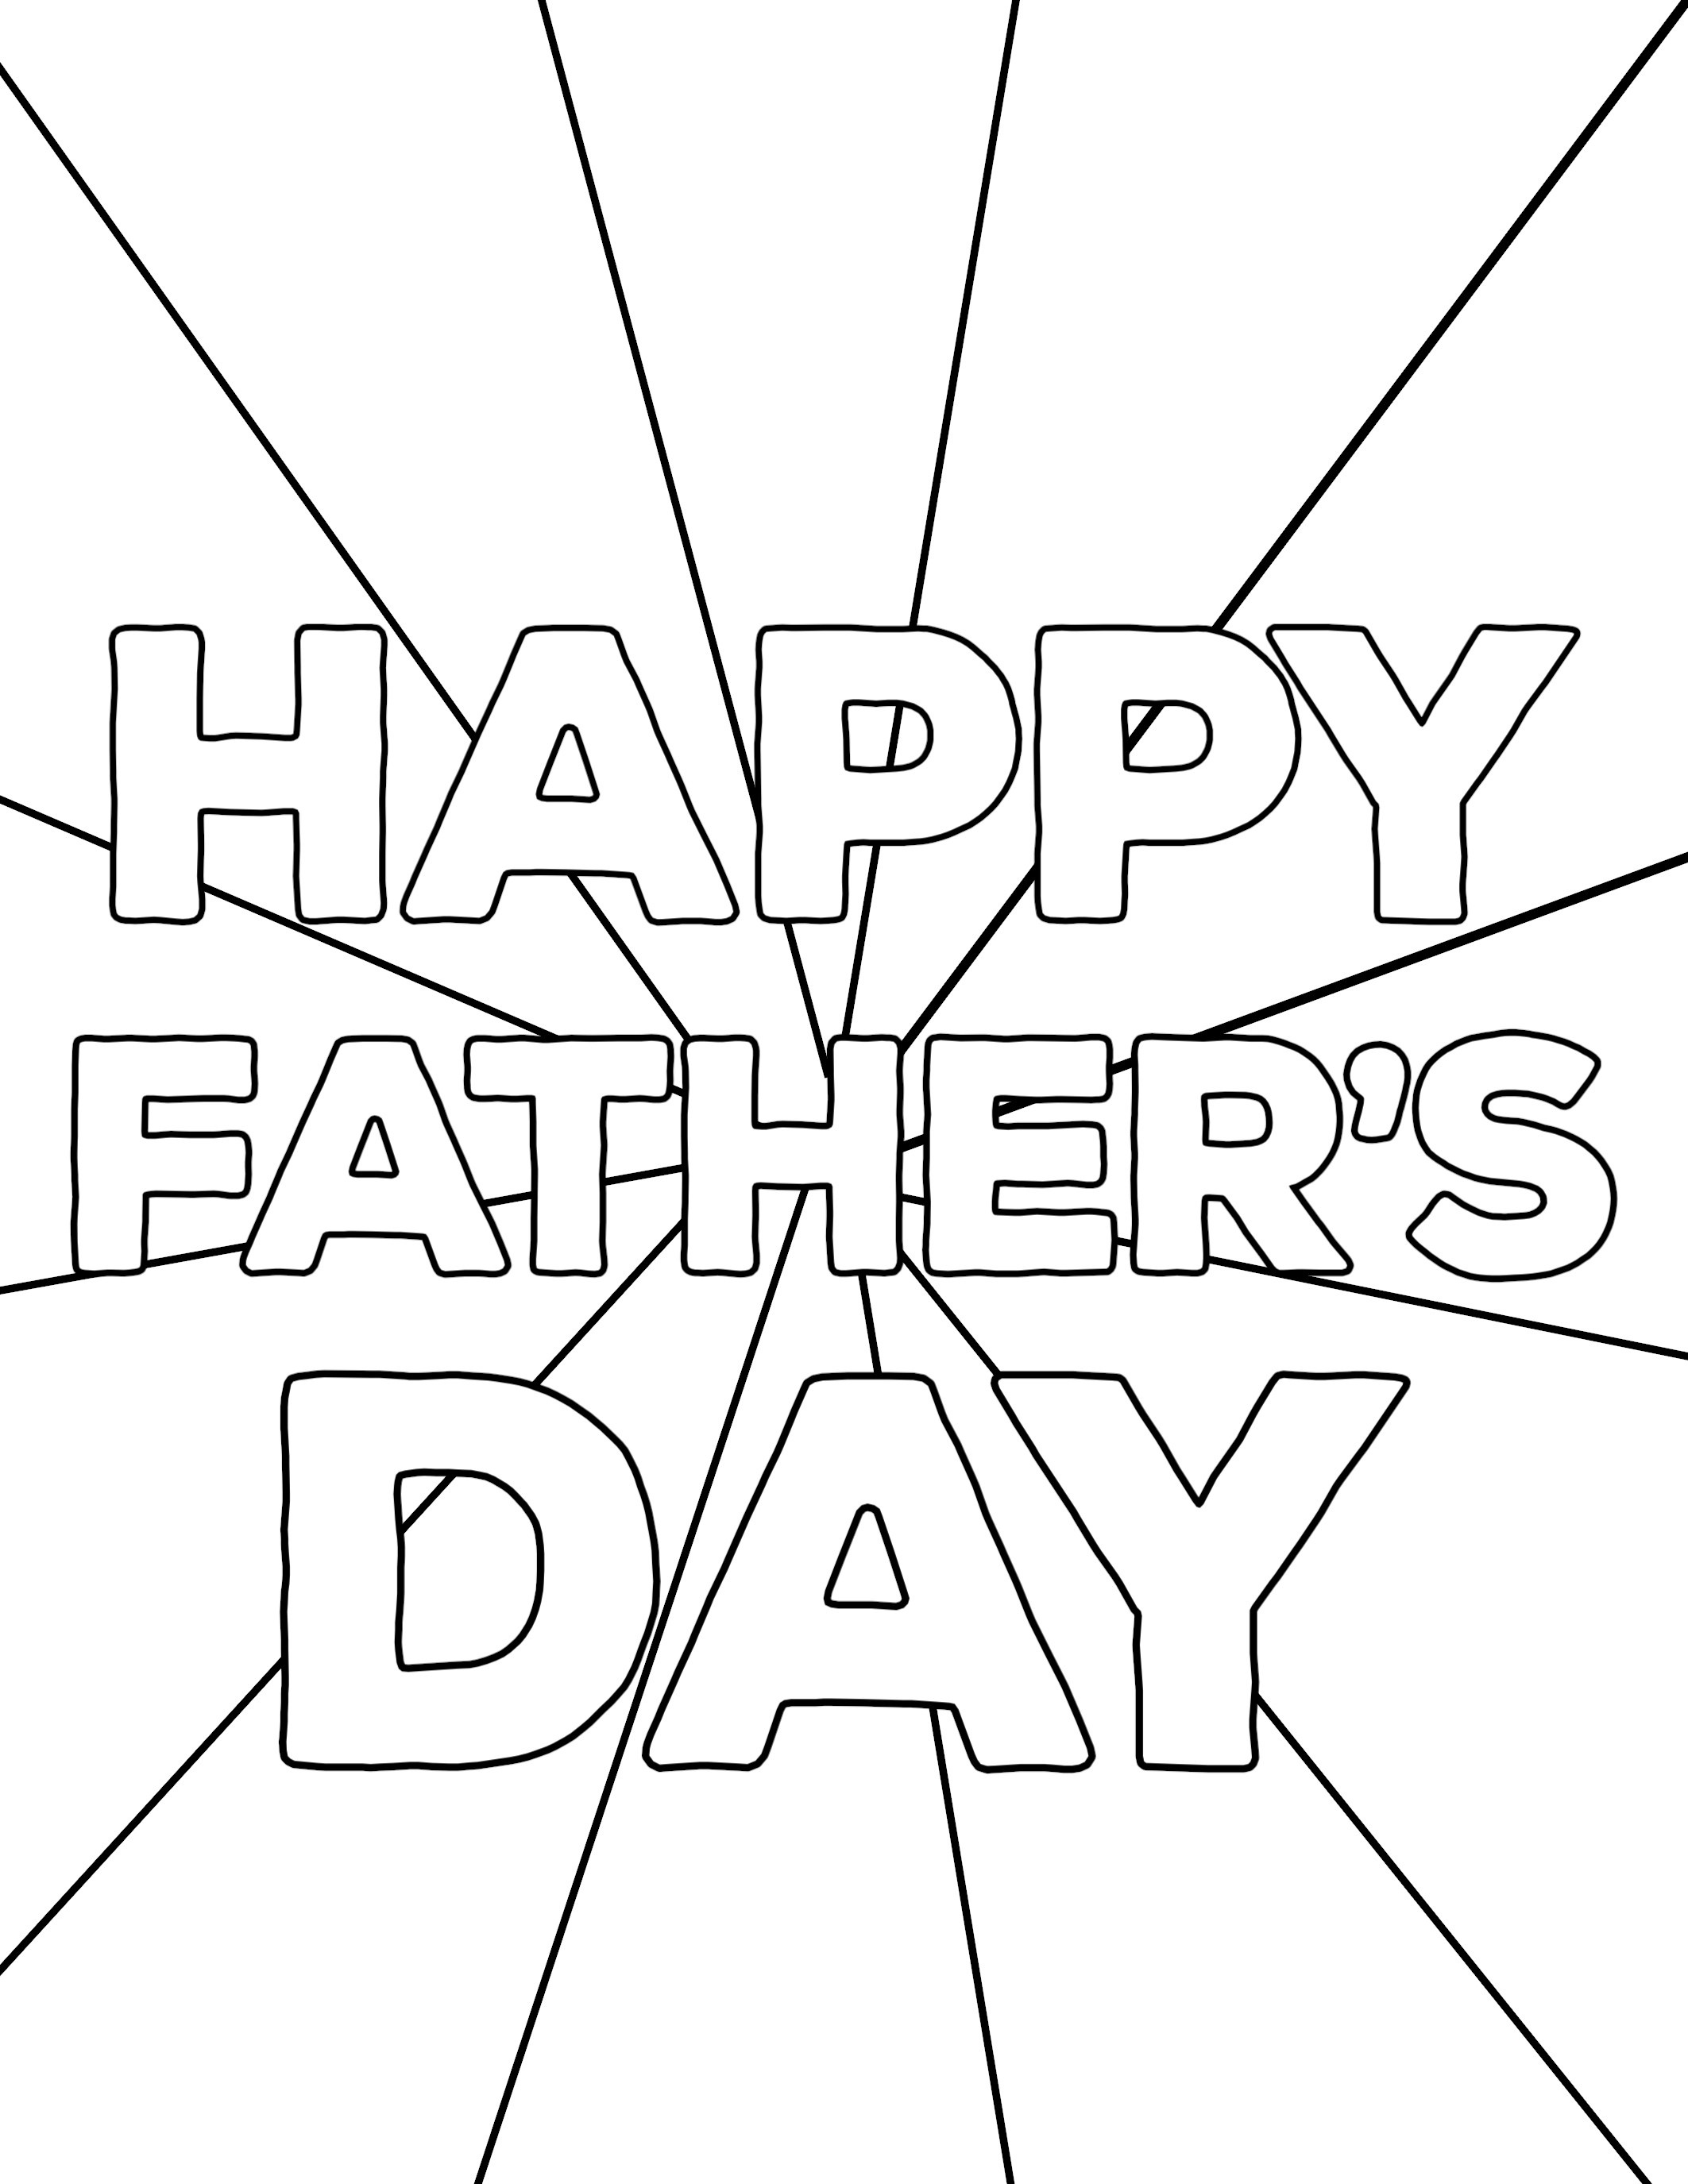 Printable Fathers Day Cards For Grandpa To Color Printable Cards